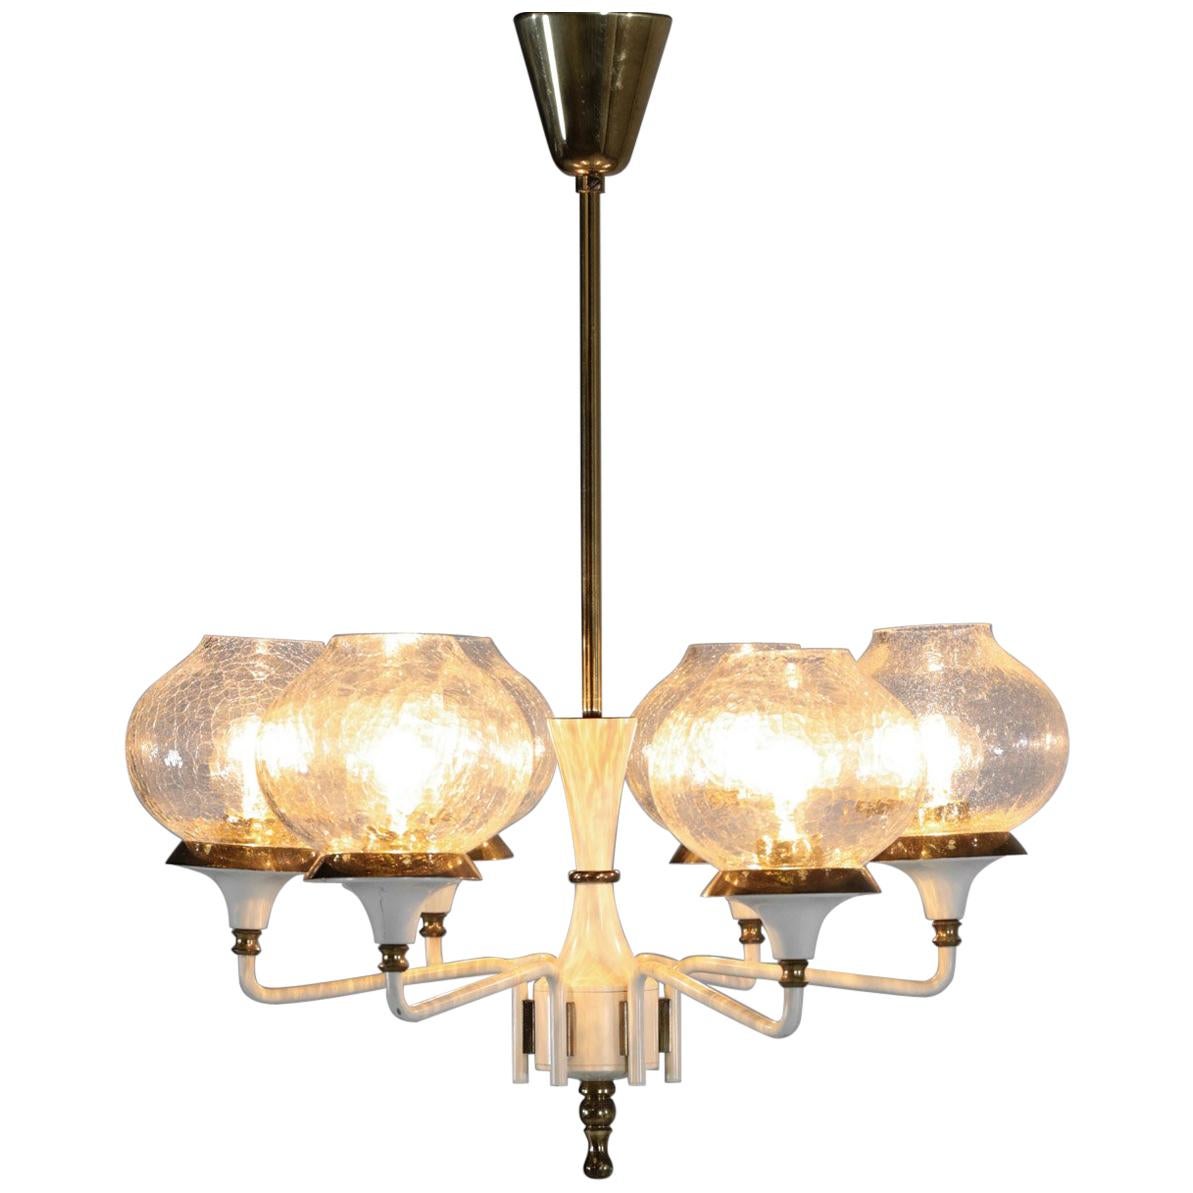 Midcentury Pendant Brass and Glass Scandinavian in Style of Hans Age Jakobsson